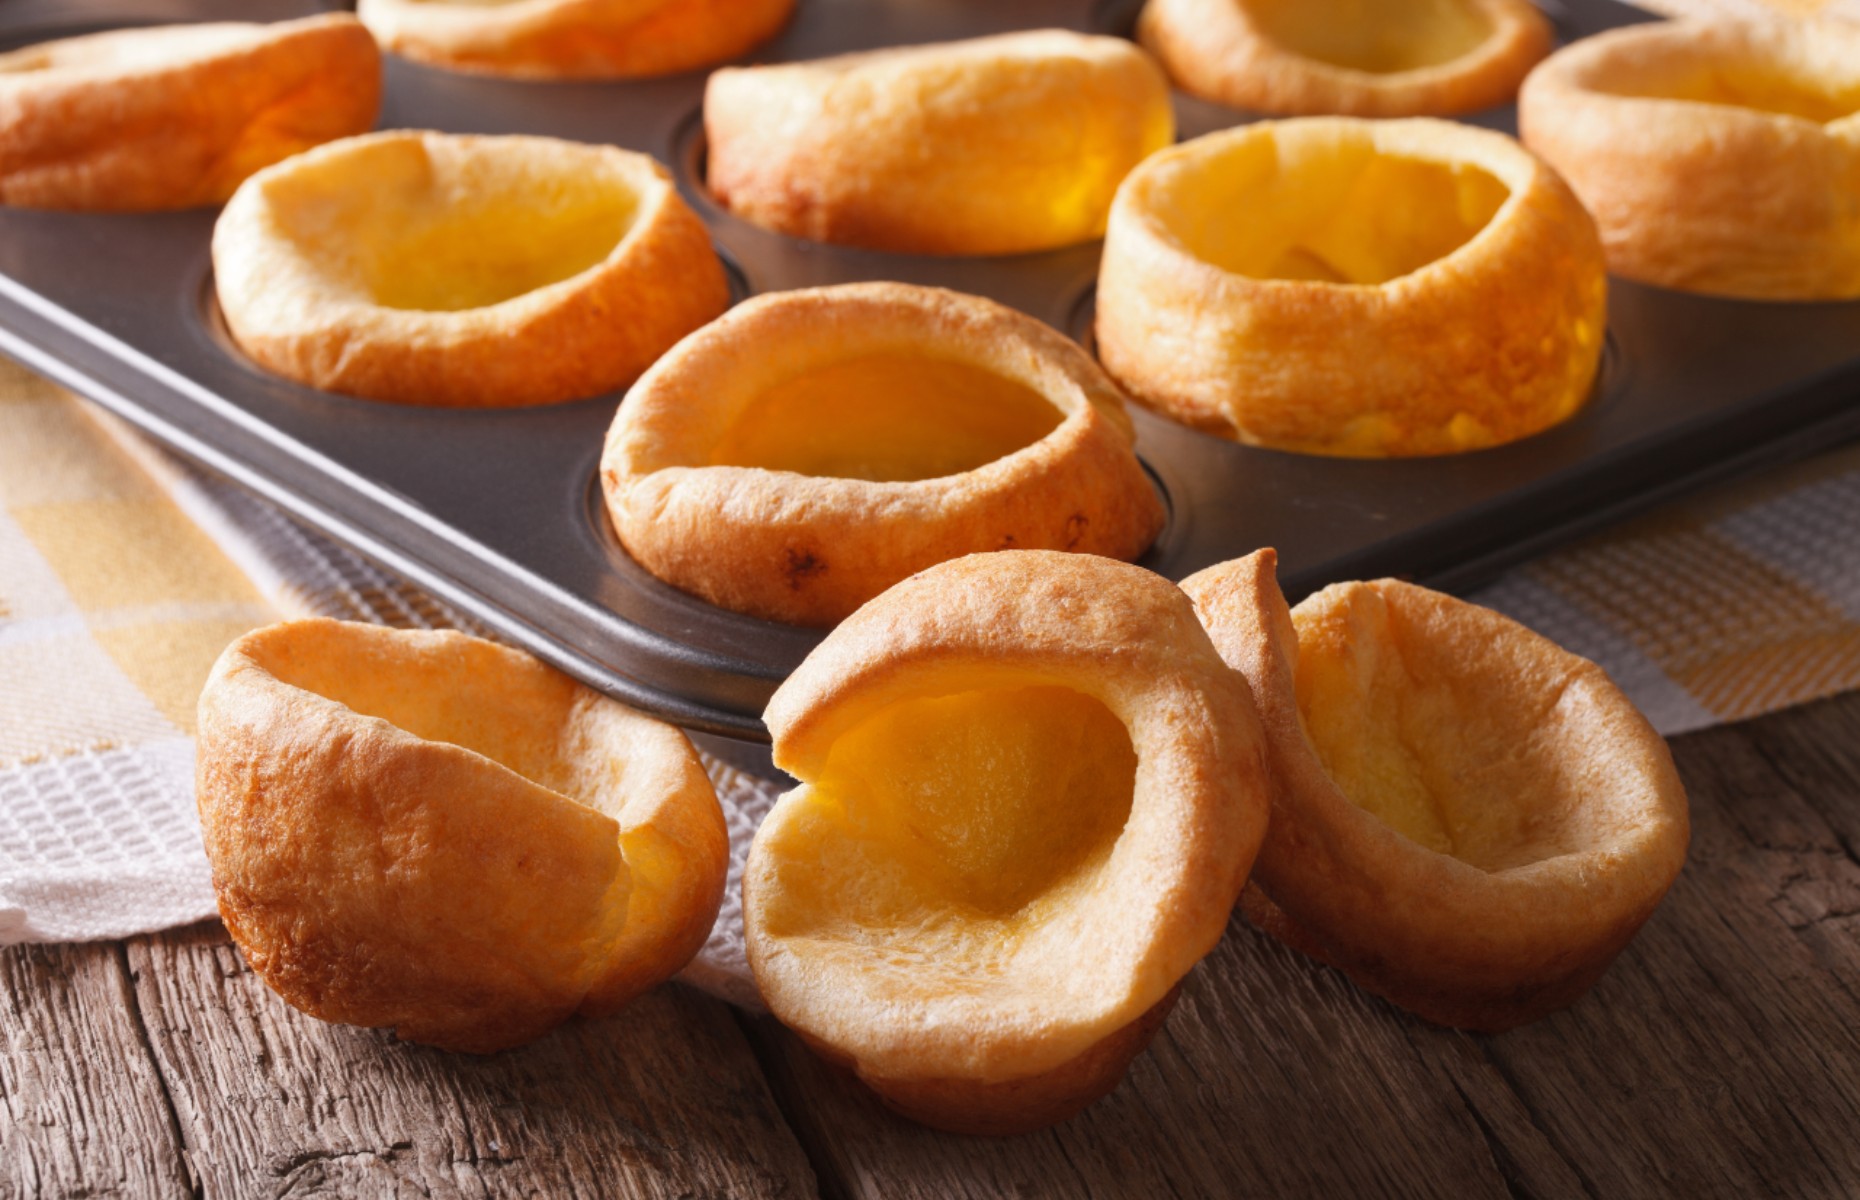 Freshly cooked Yorkshire pudding (Image: AS Food Studio/Shutterstock)